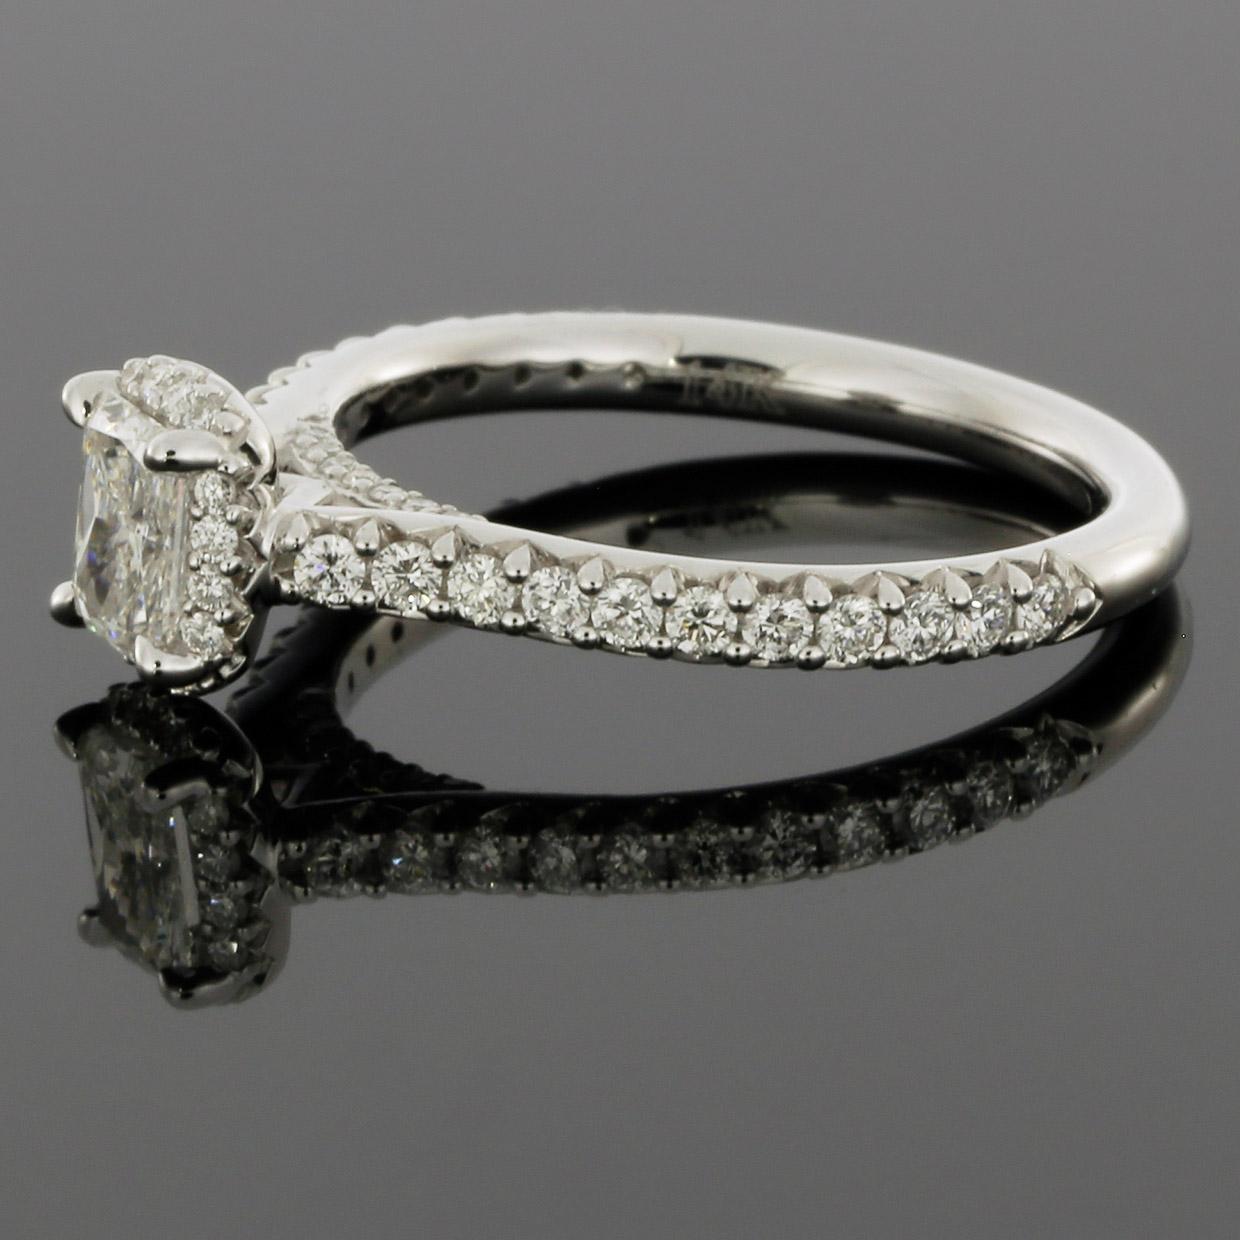 White Gold 0.96 Carat Radiant Diamond Halo Engagement Ring In Excellent Condition For Sale In Columbia, MO